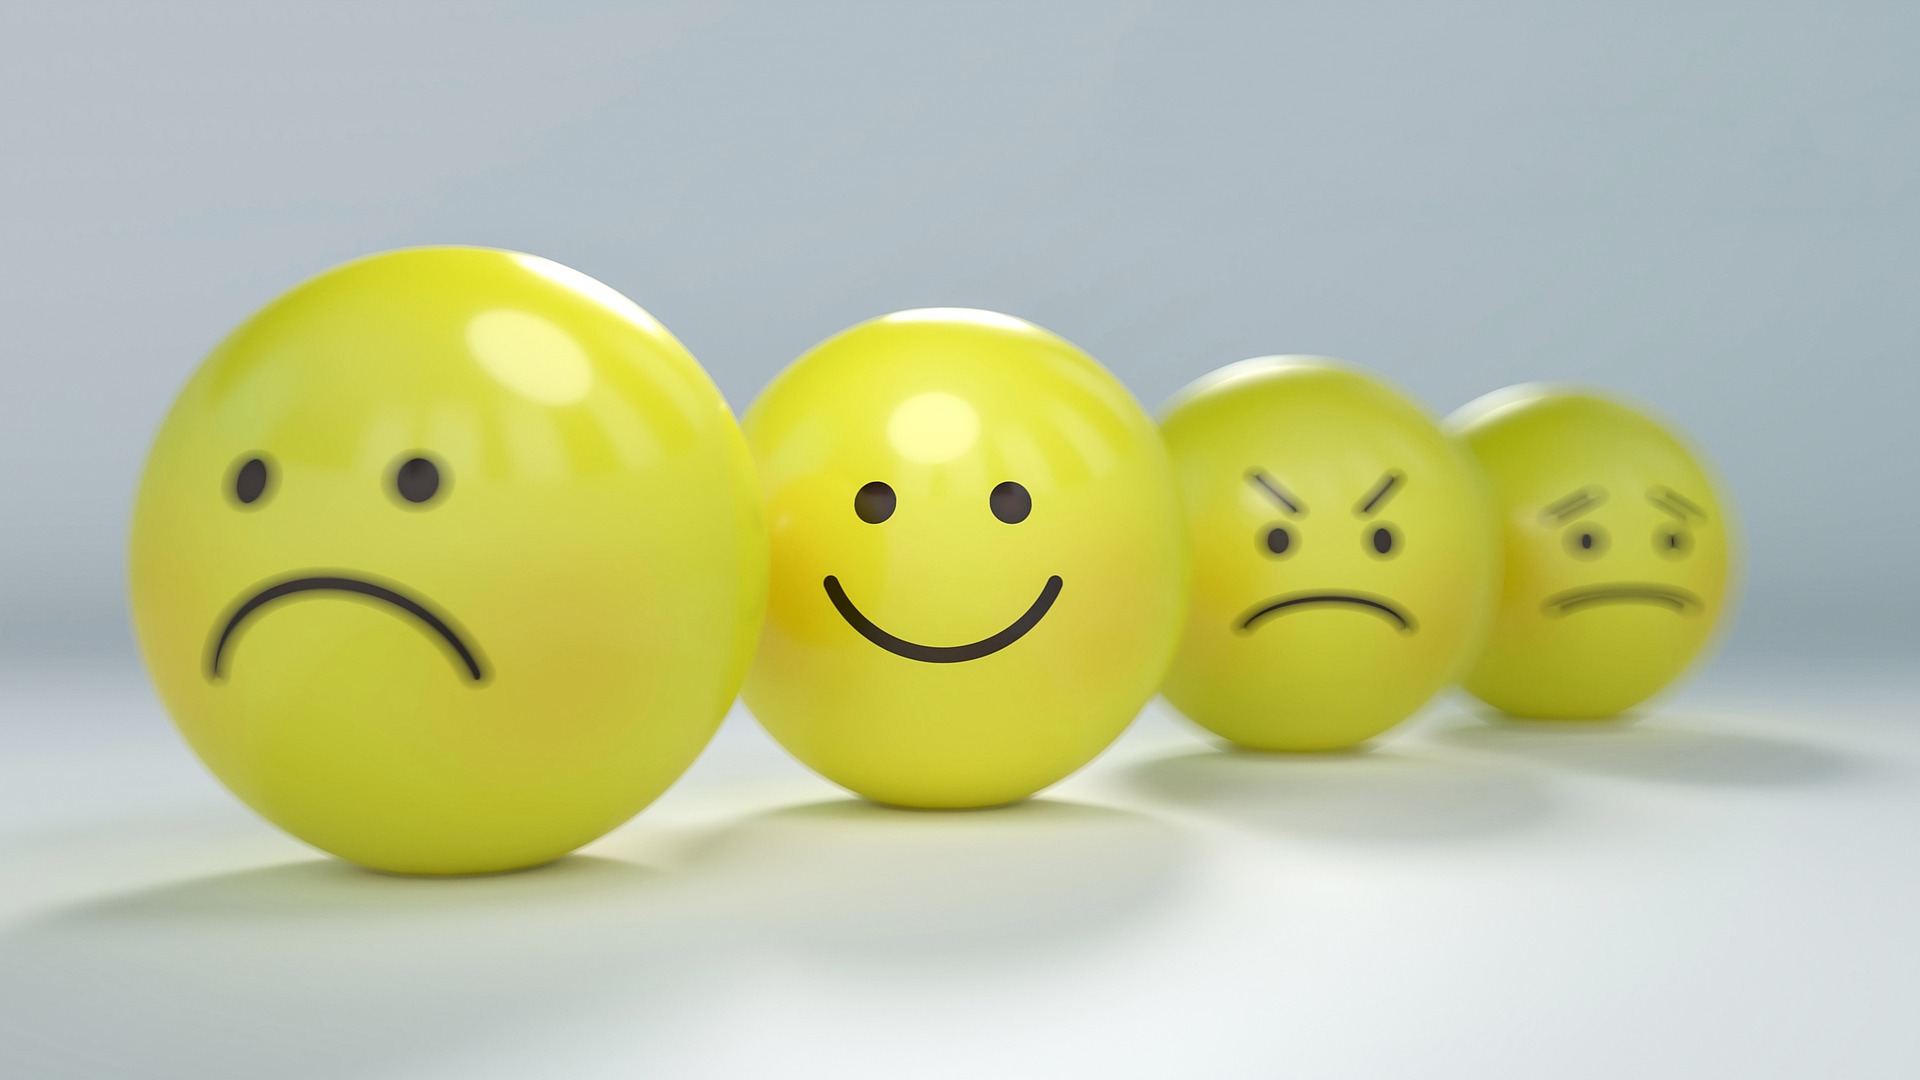 smiley faces showing range of happy and negative emotions